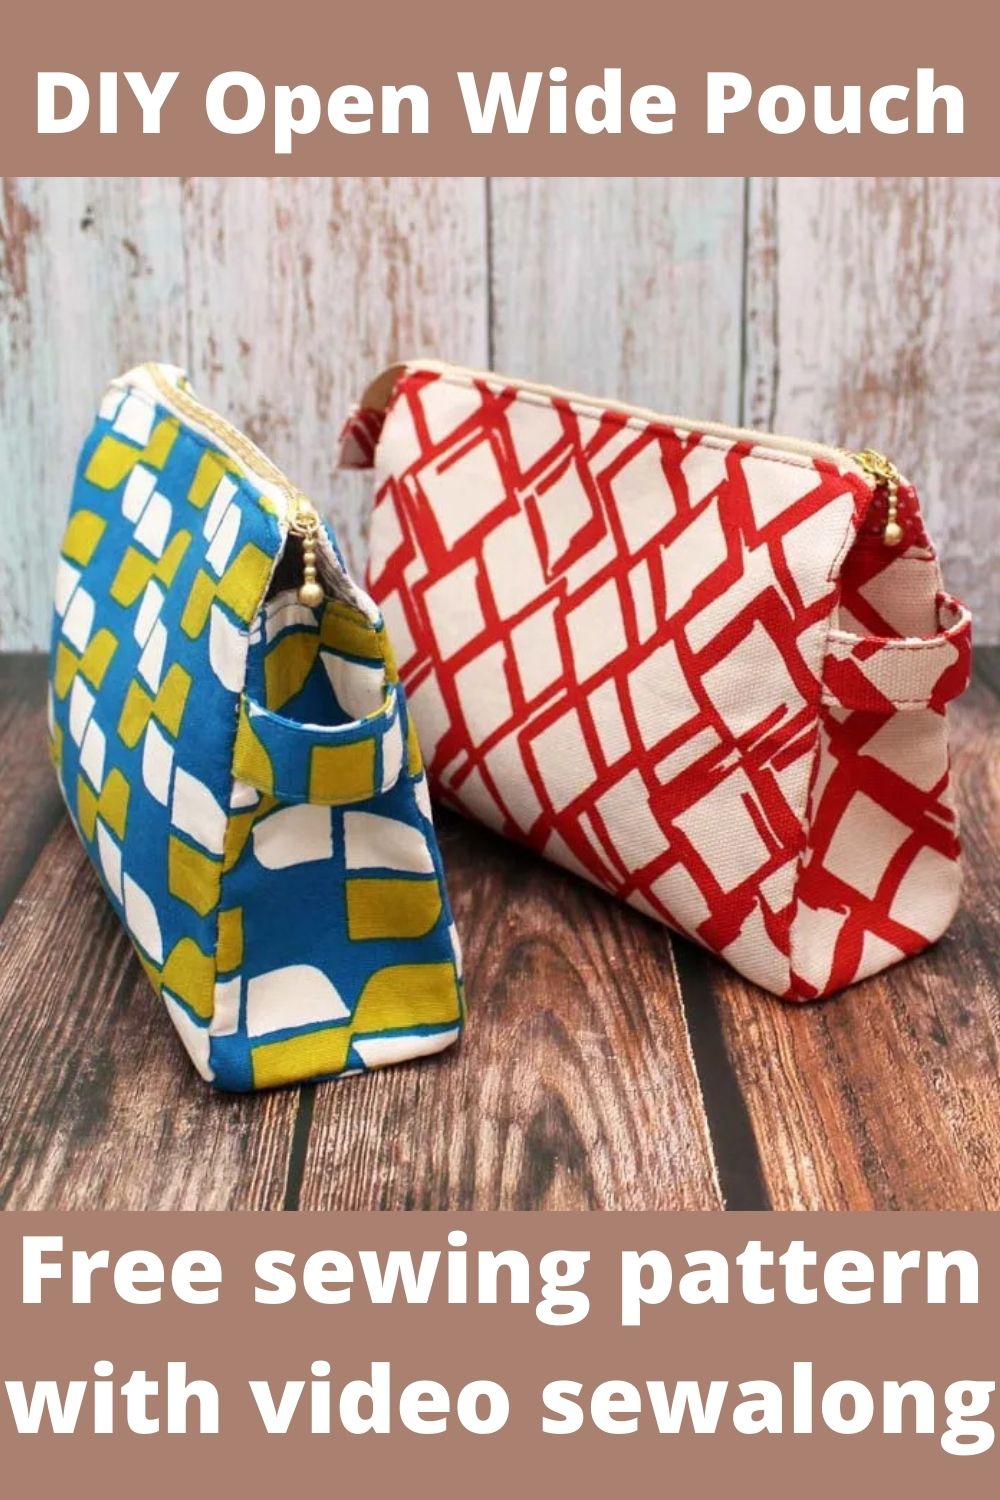 Two zipper pouches to sew 